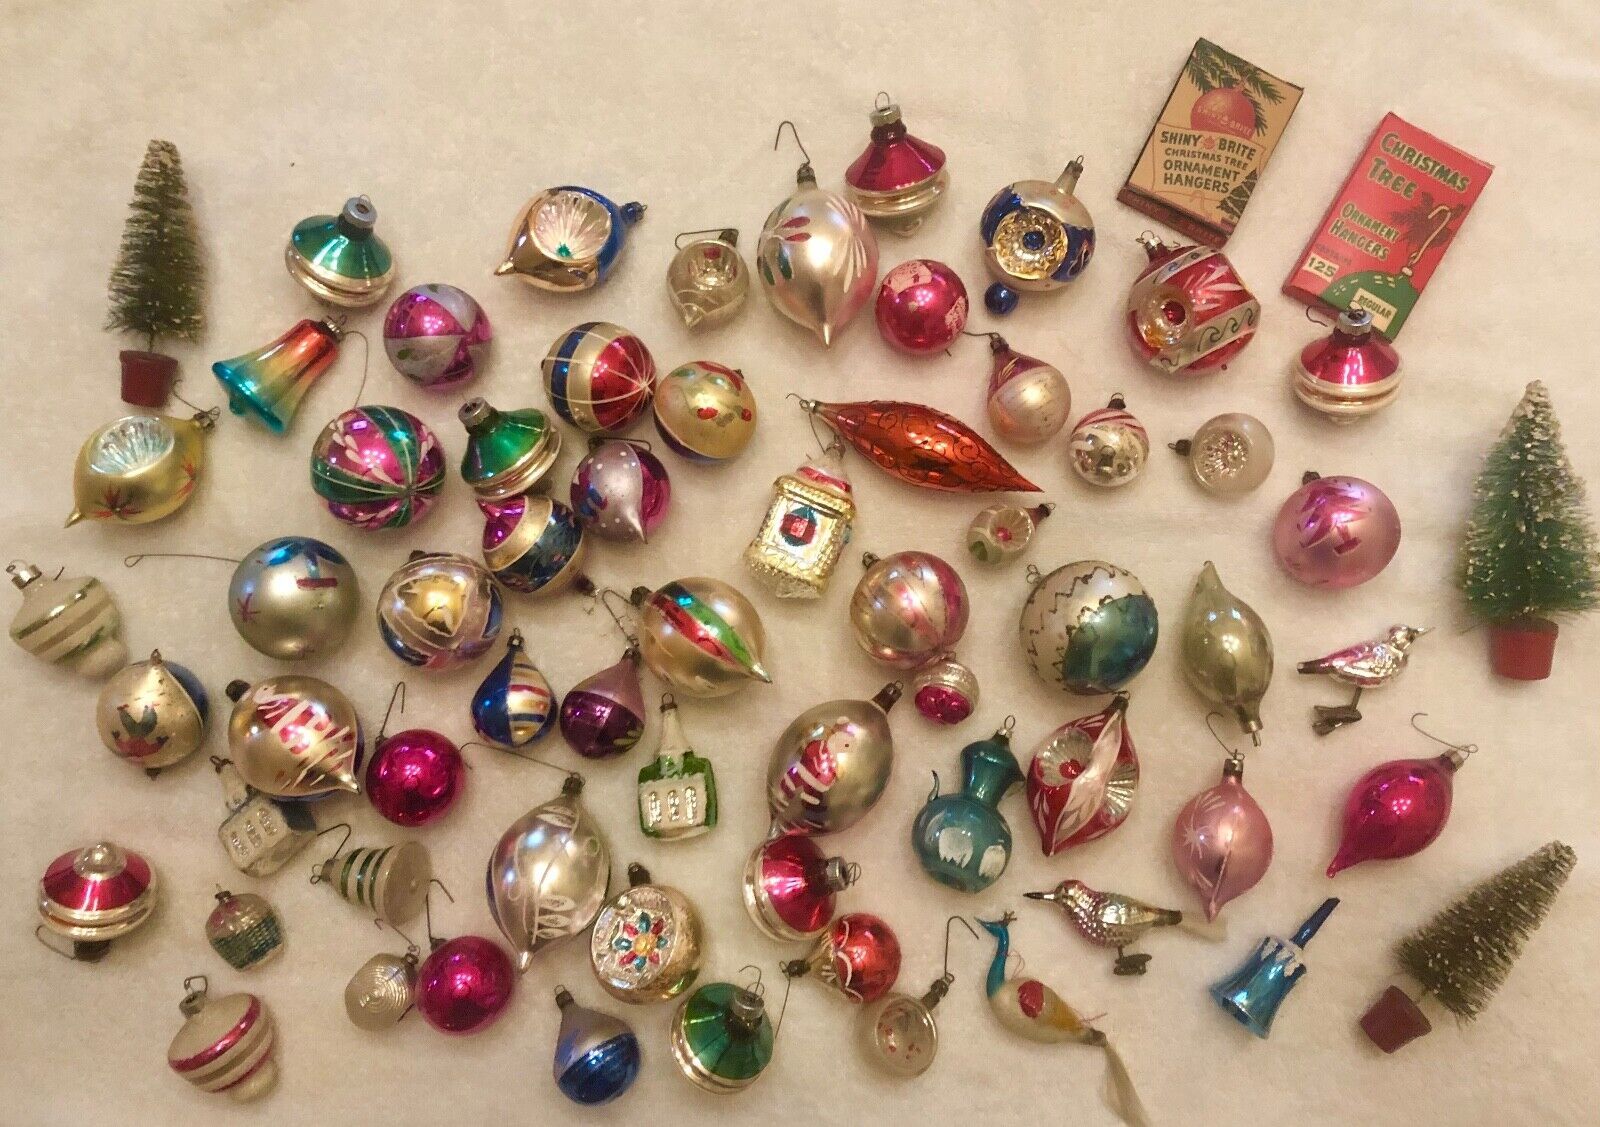 62 VINTAGE GERMAN POLISH AMERICAN GLASS FEATHER TREE ORNAMENTS & MORE